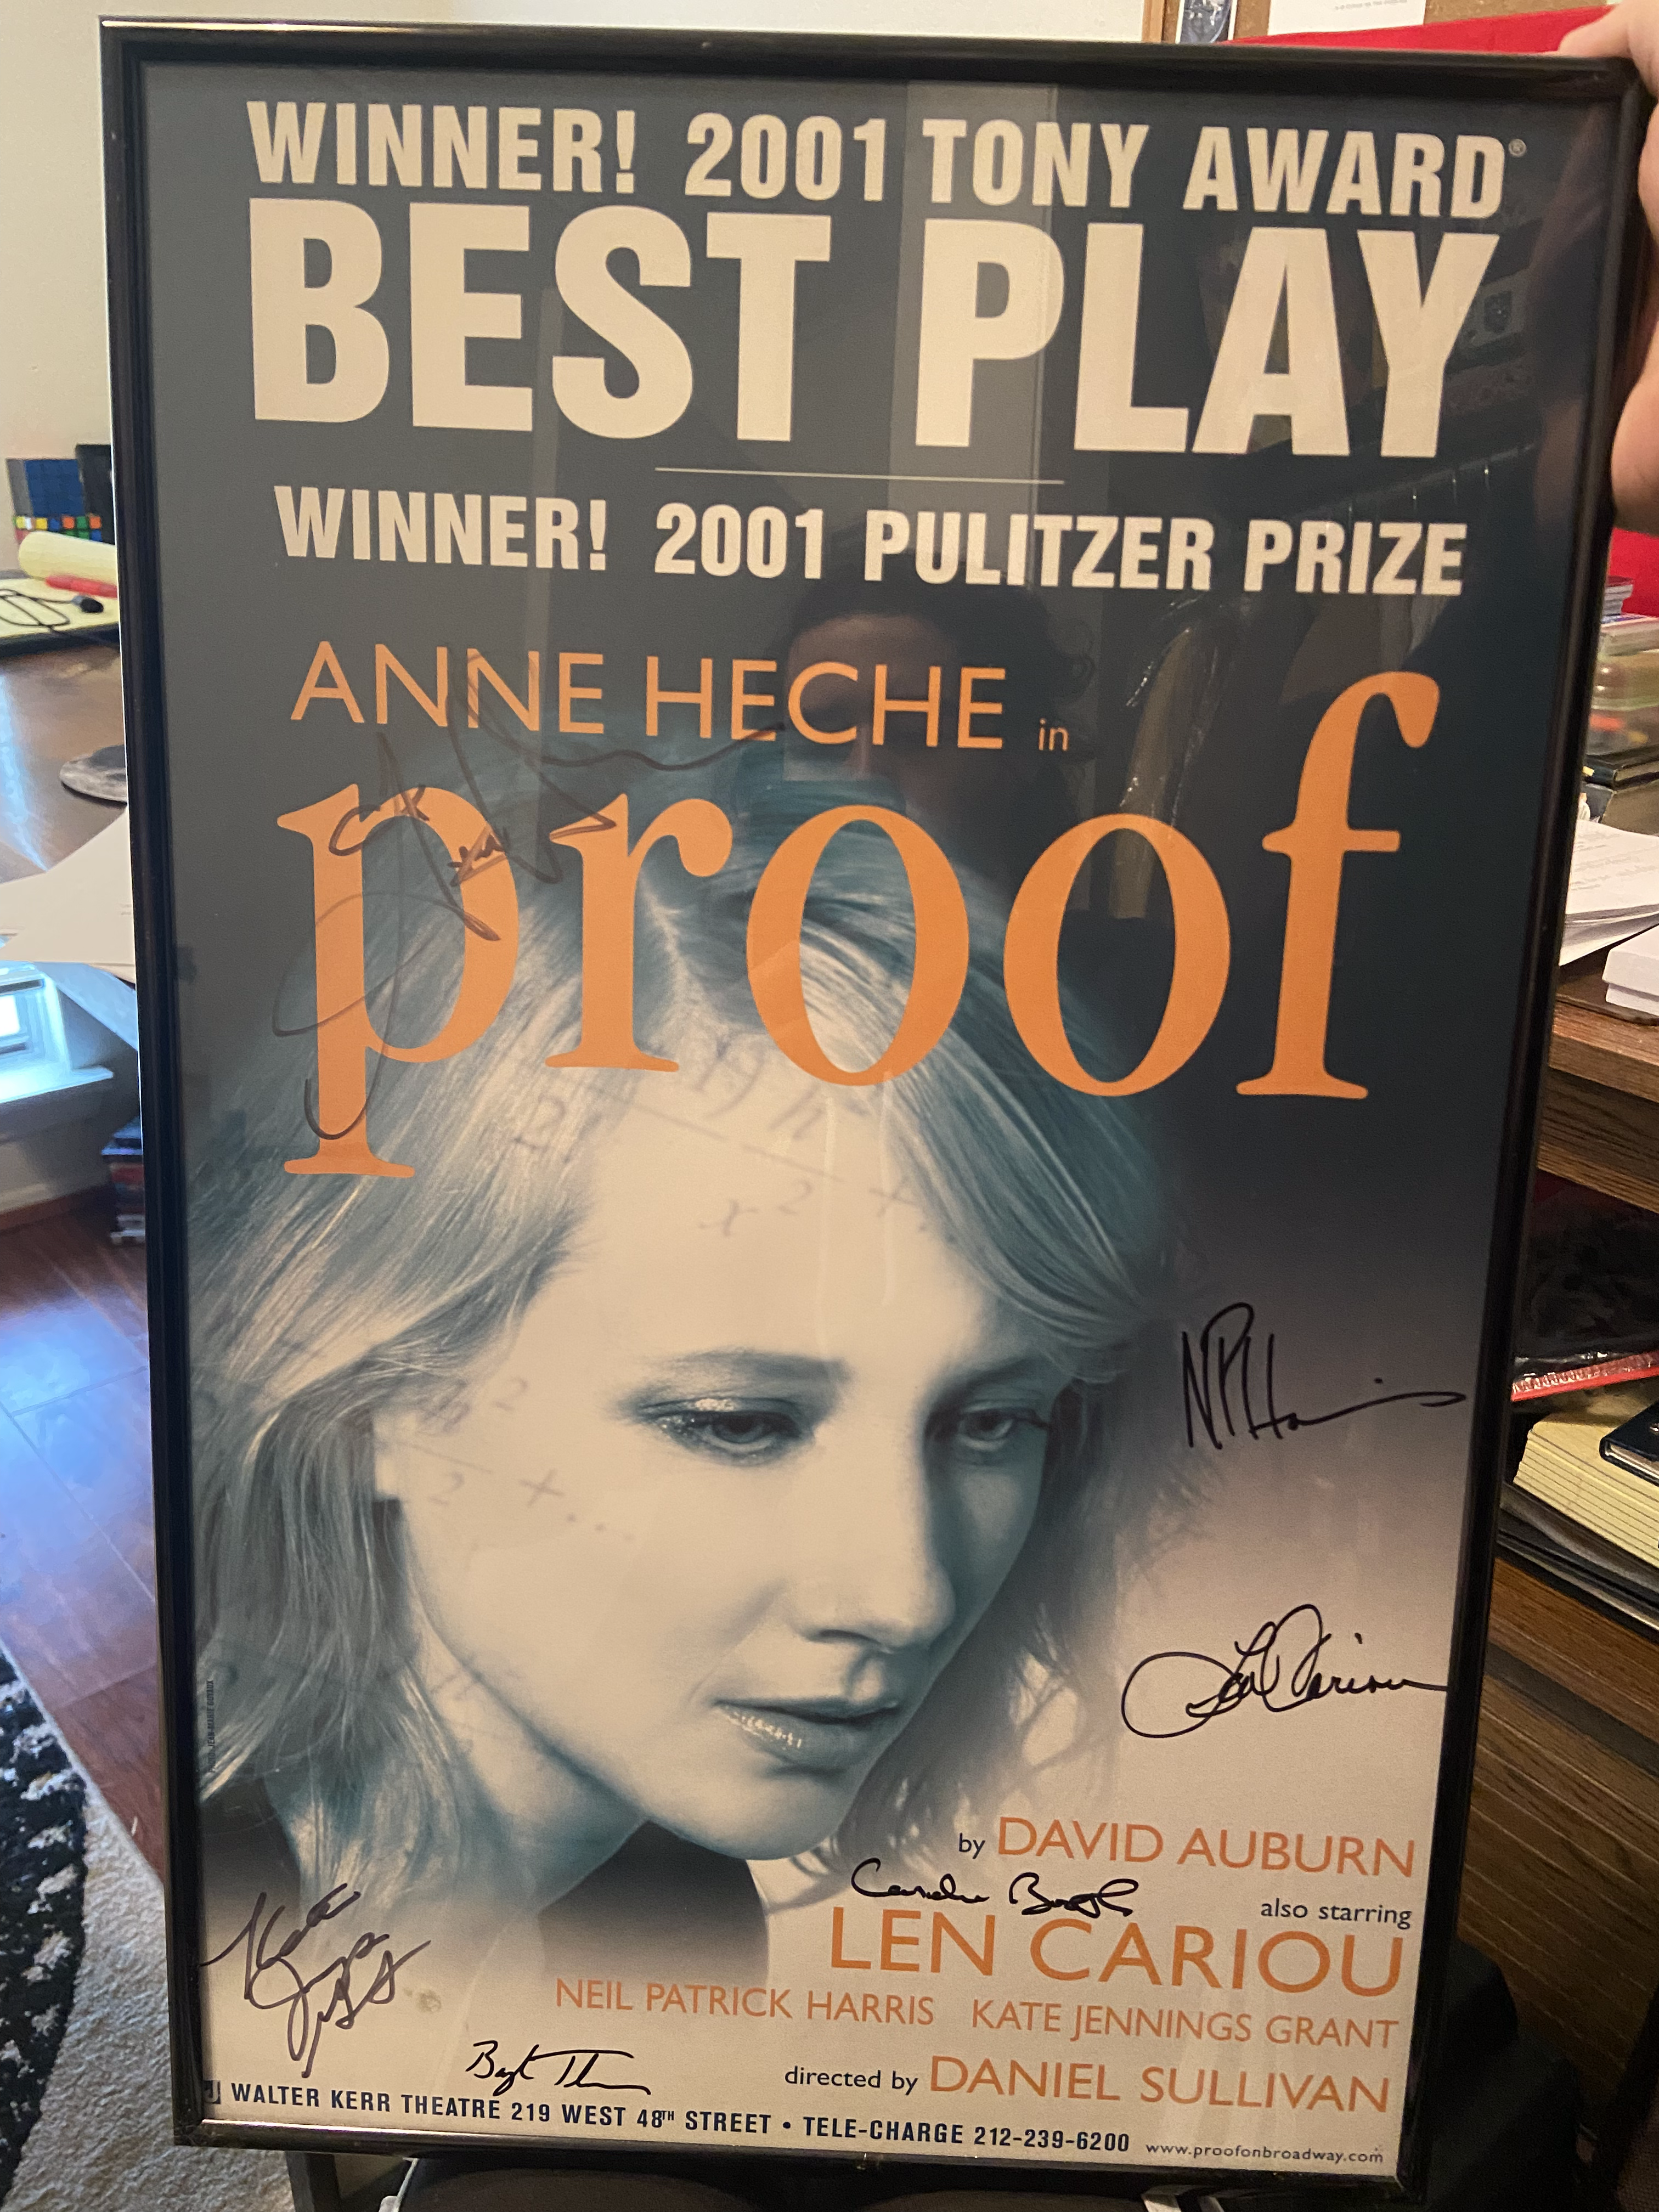 Signed Proof Poster - Walter Kerr Theatre, NYC 2002 - $300 OBO